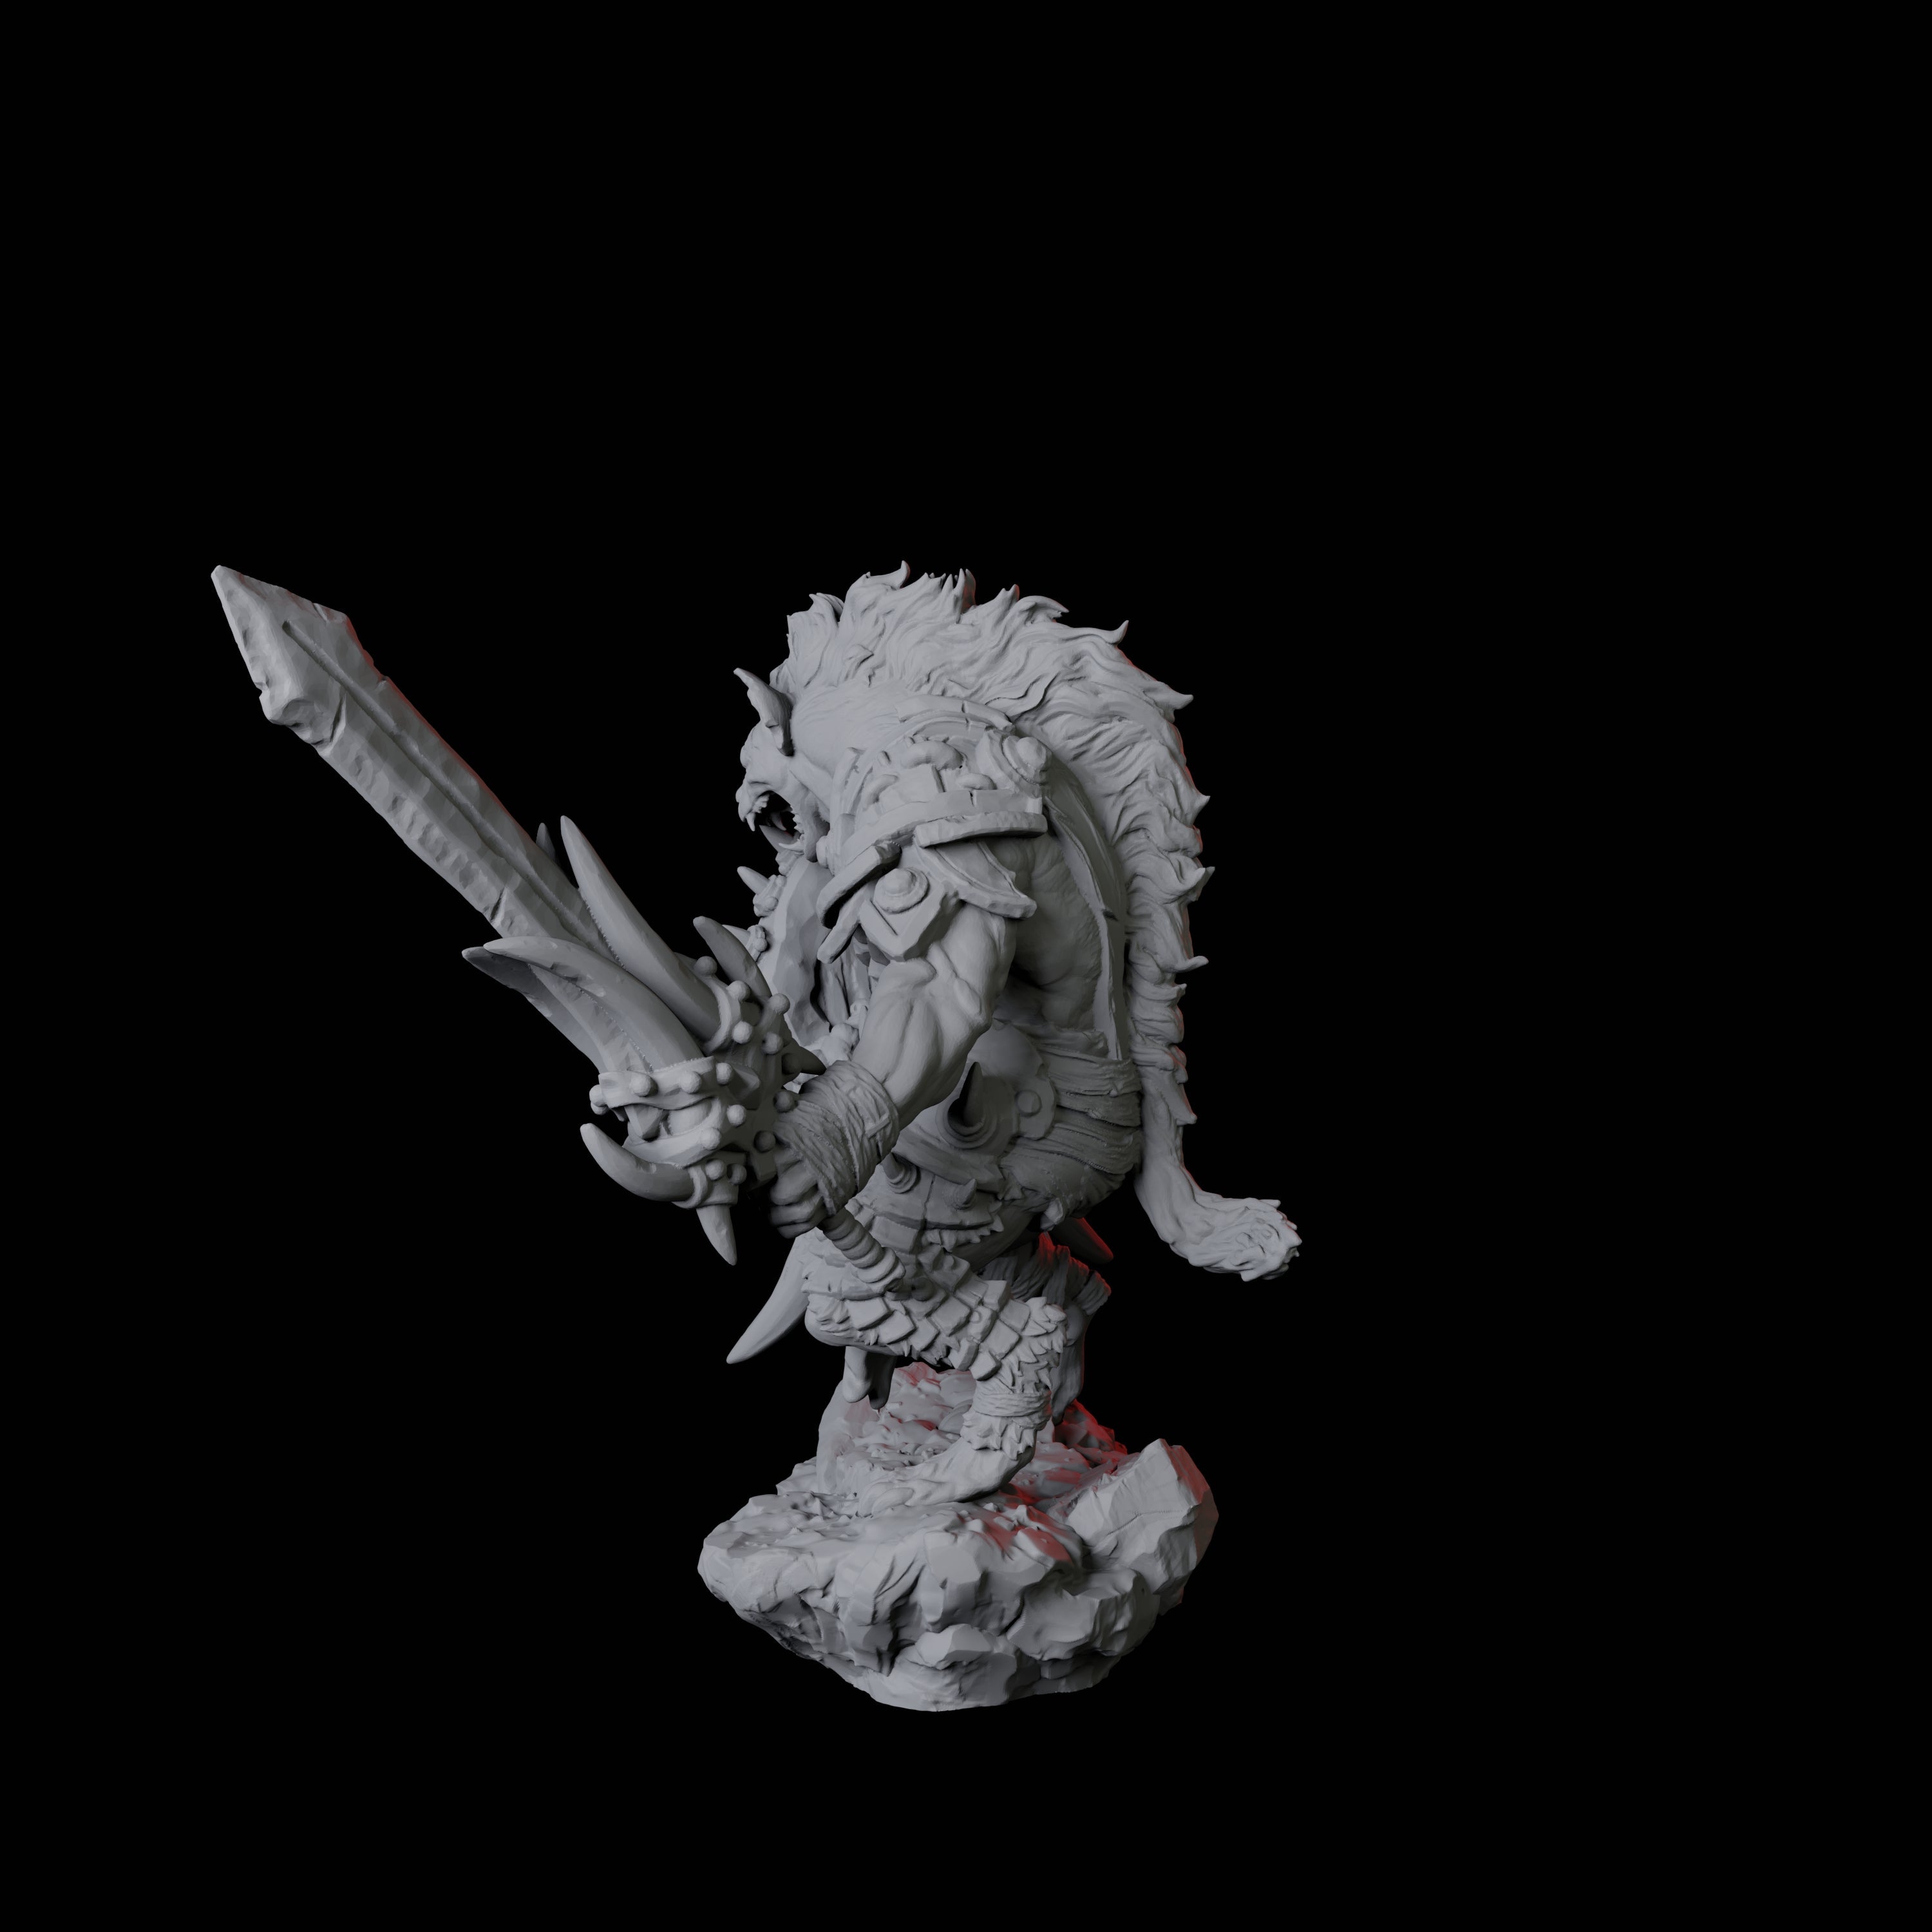 Gnoll Scout B Miniature for Dungeons and Dragons, Pathfinder or other TTRPGs